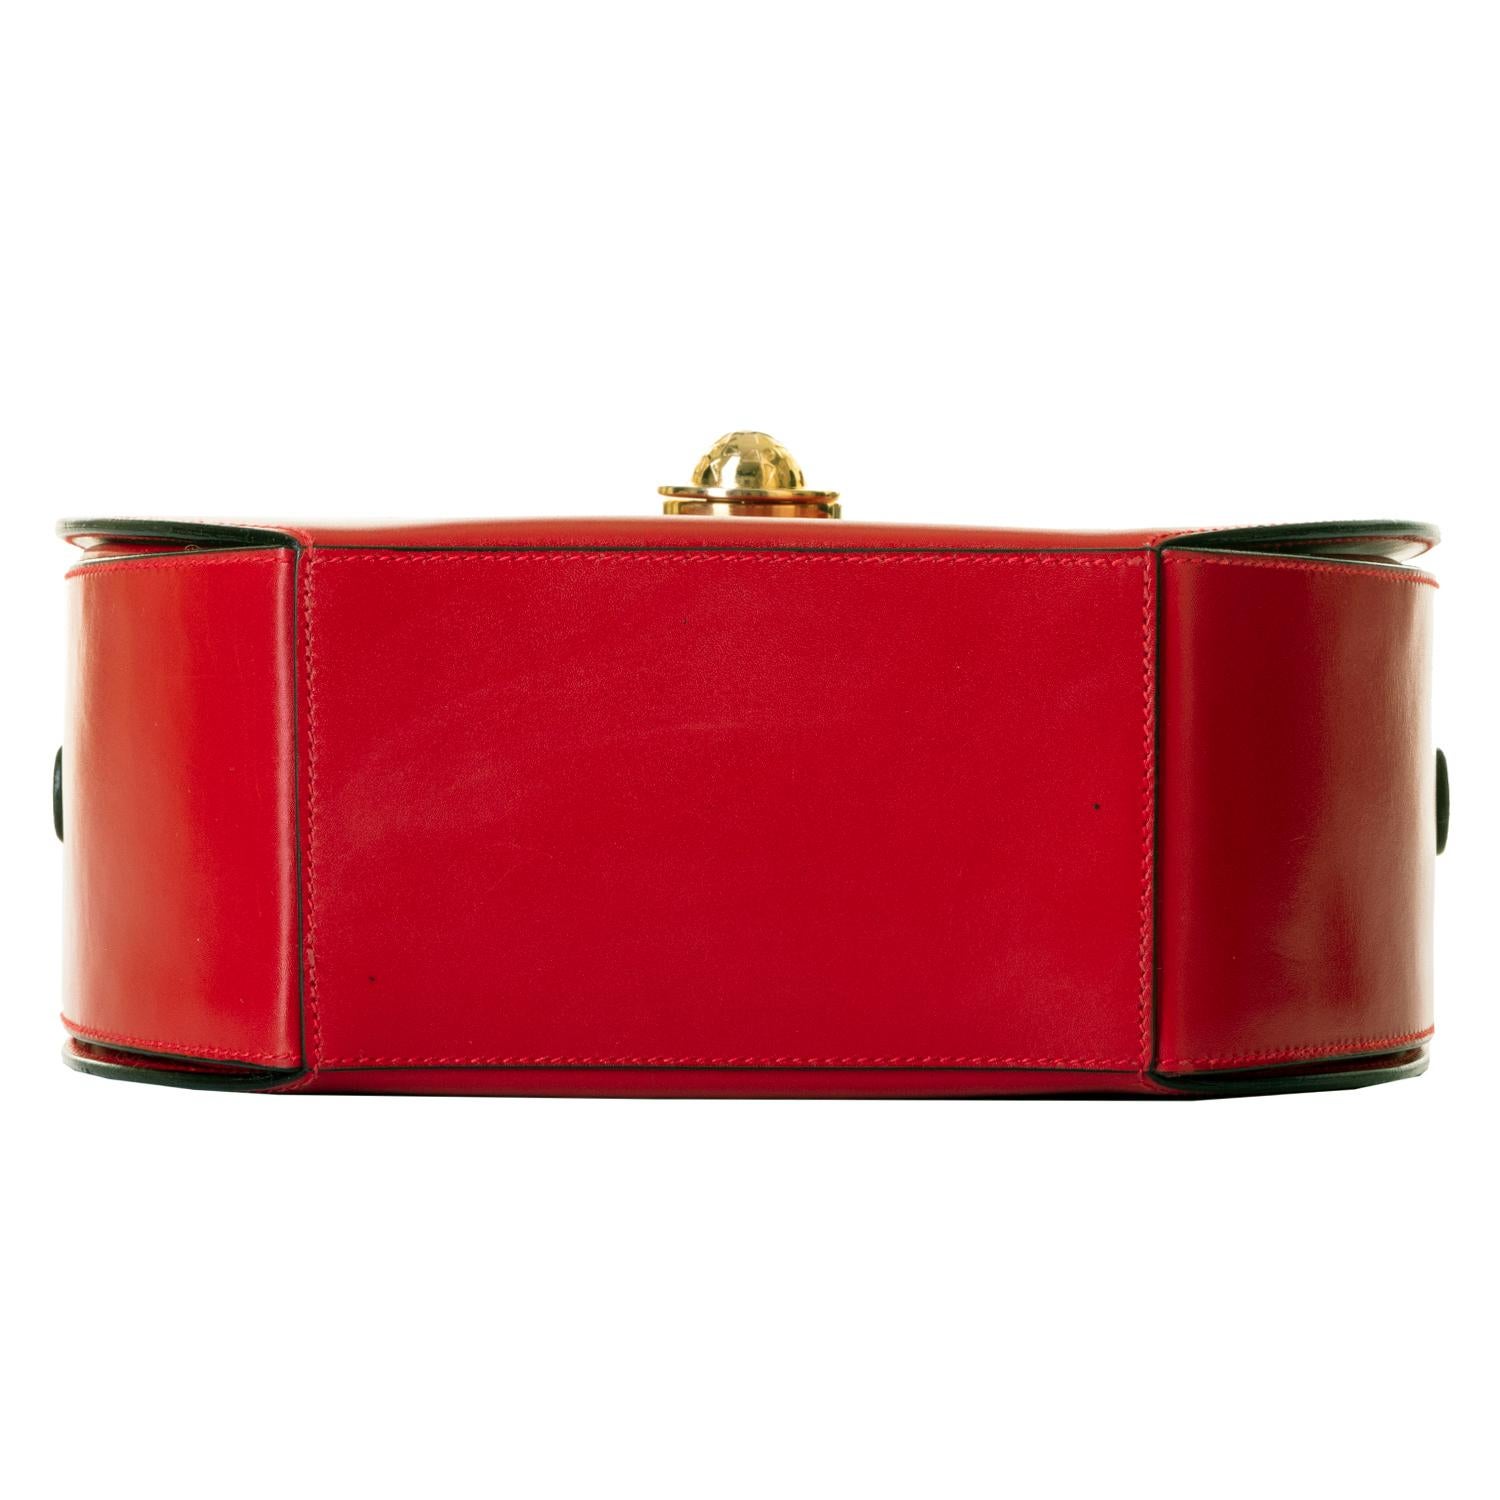 As New Celine of Paris Red Box Leather 'Star' Shoulder Bag with Gold Hardware For Sale 1